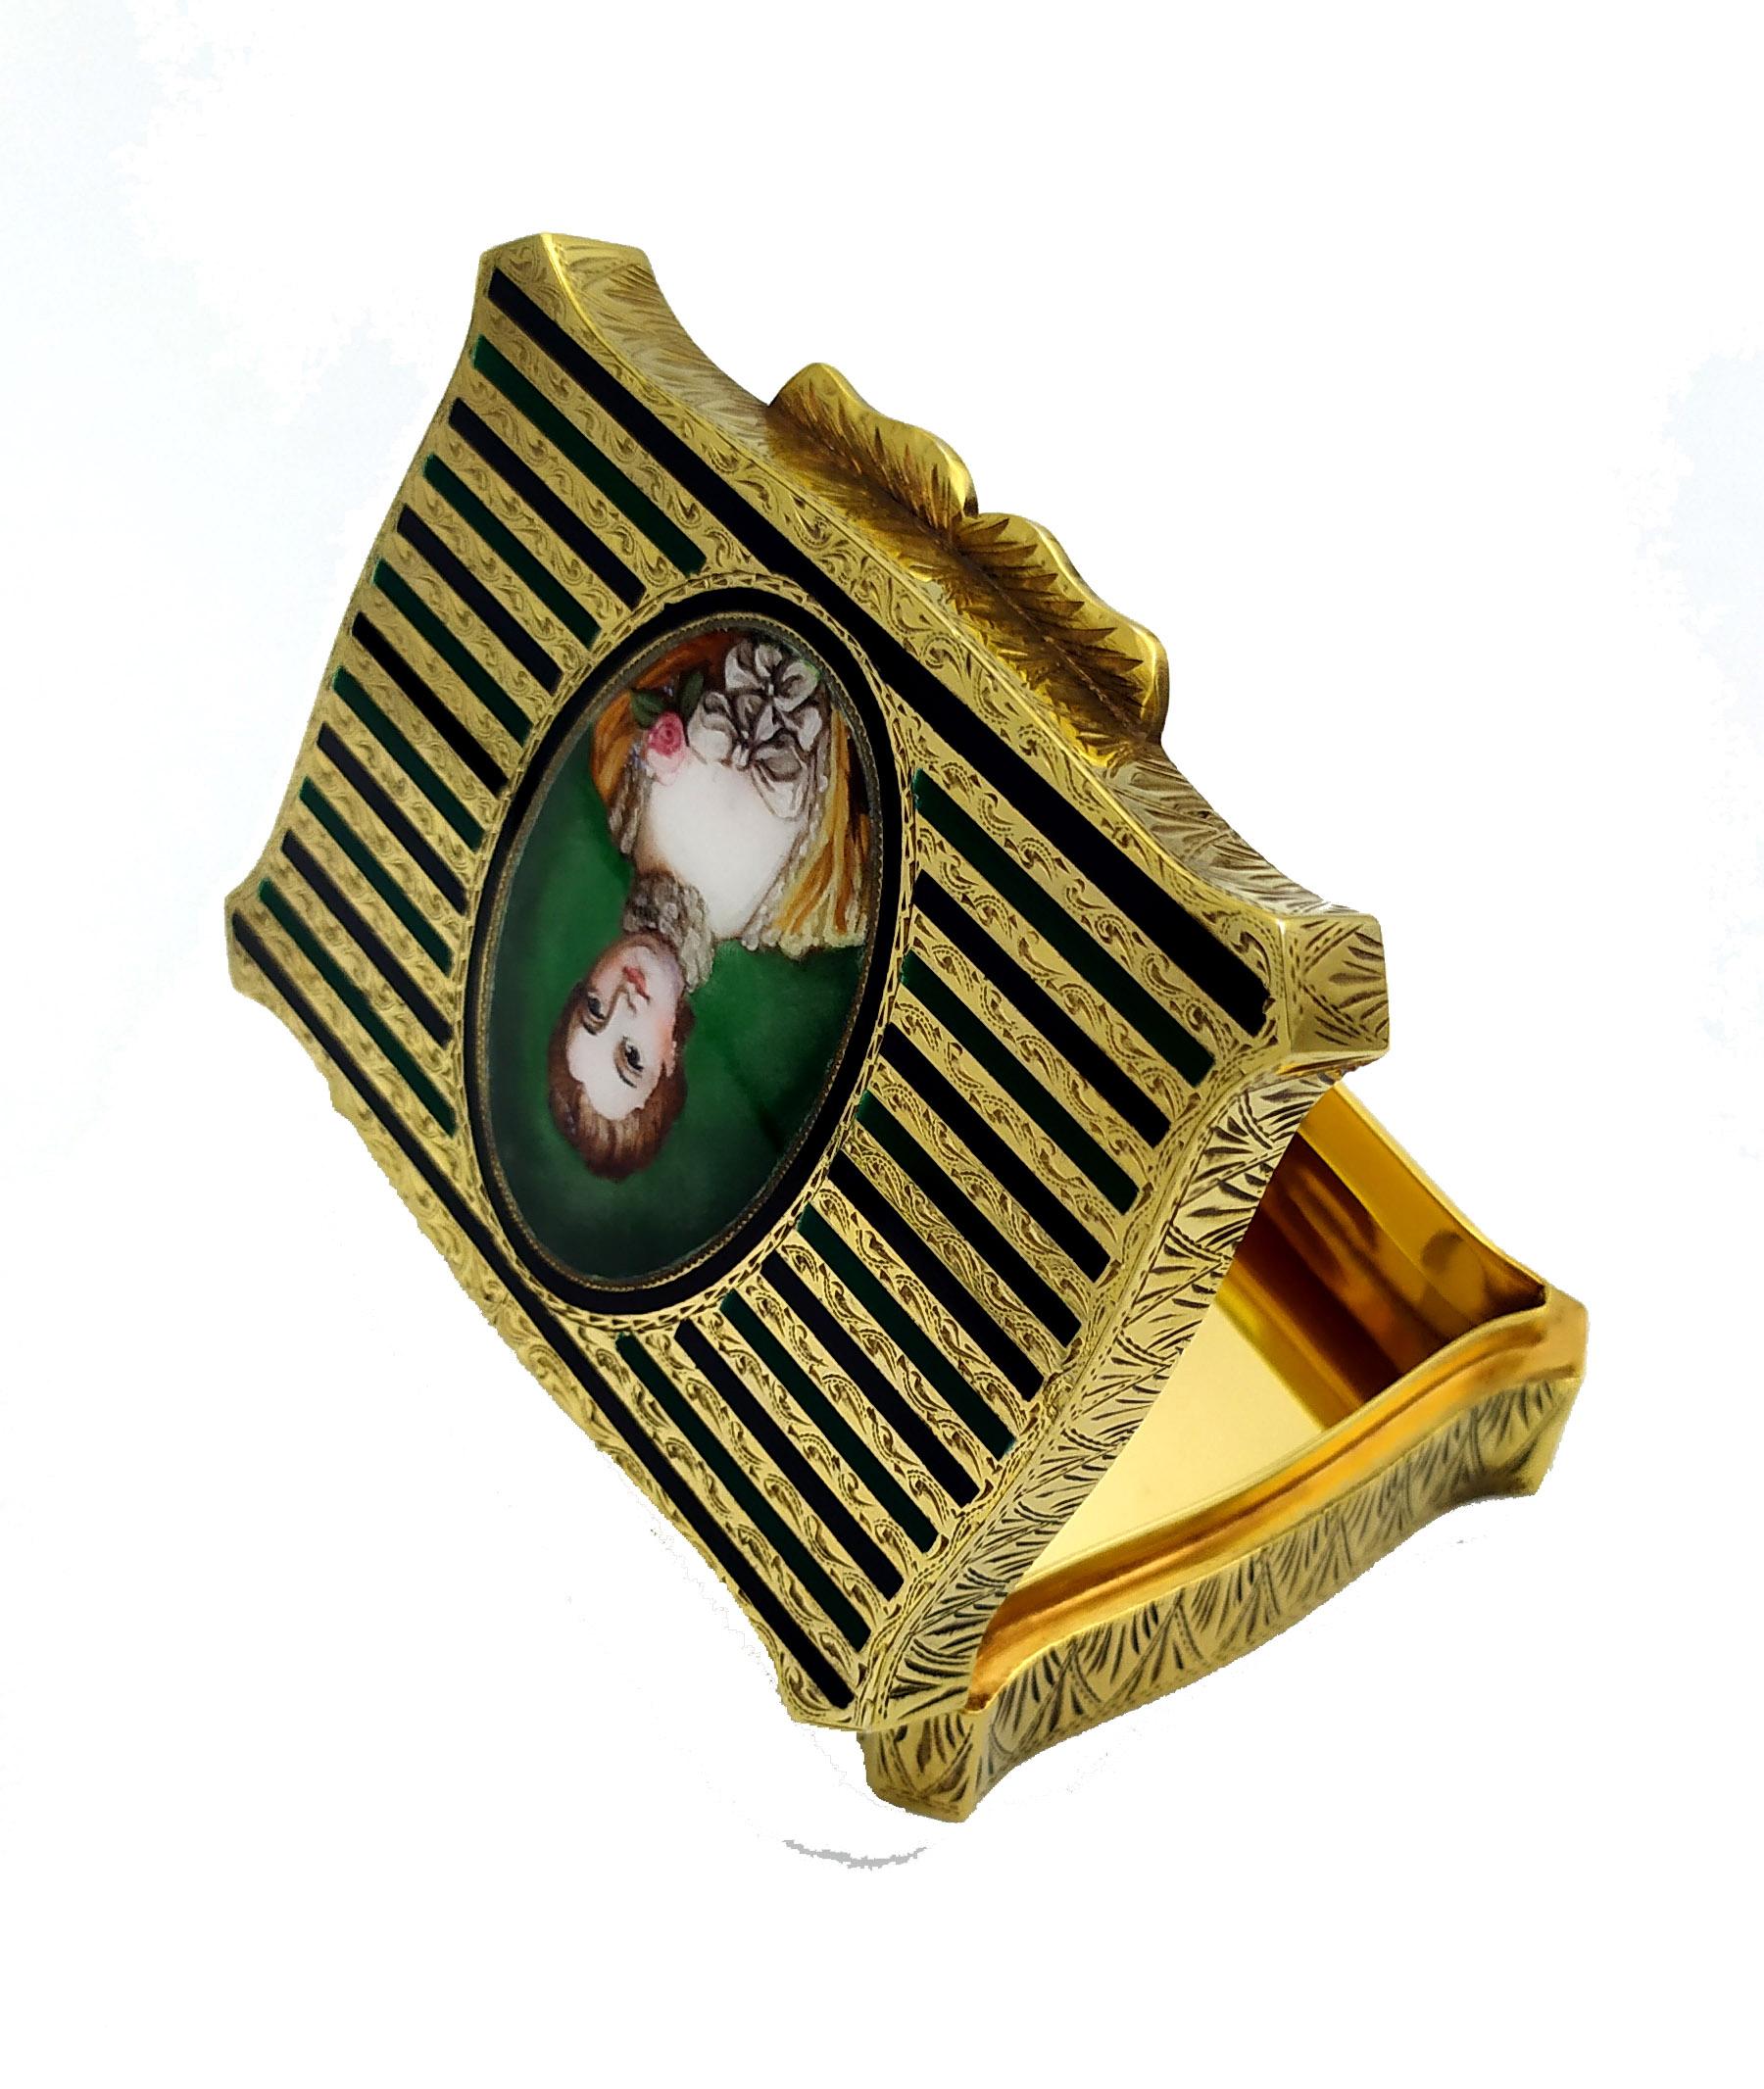 Shaped snuff box in 925/1000 sterling silver gold plated with fire-enameled stripes and fine oval enameled miniature in center cm. 3 x 4 hand-painted by painter Beatrice Mellana depicting a portrait of Madame de Pompadour, French Empire Napoleon I